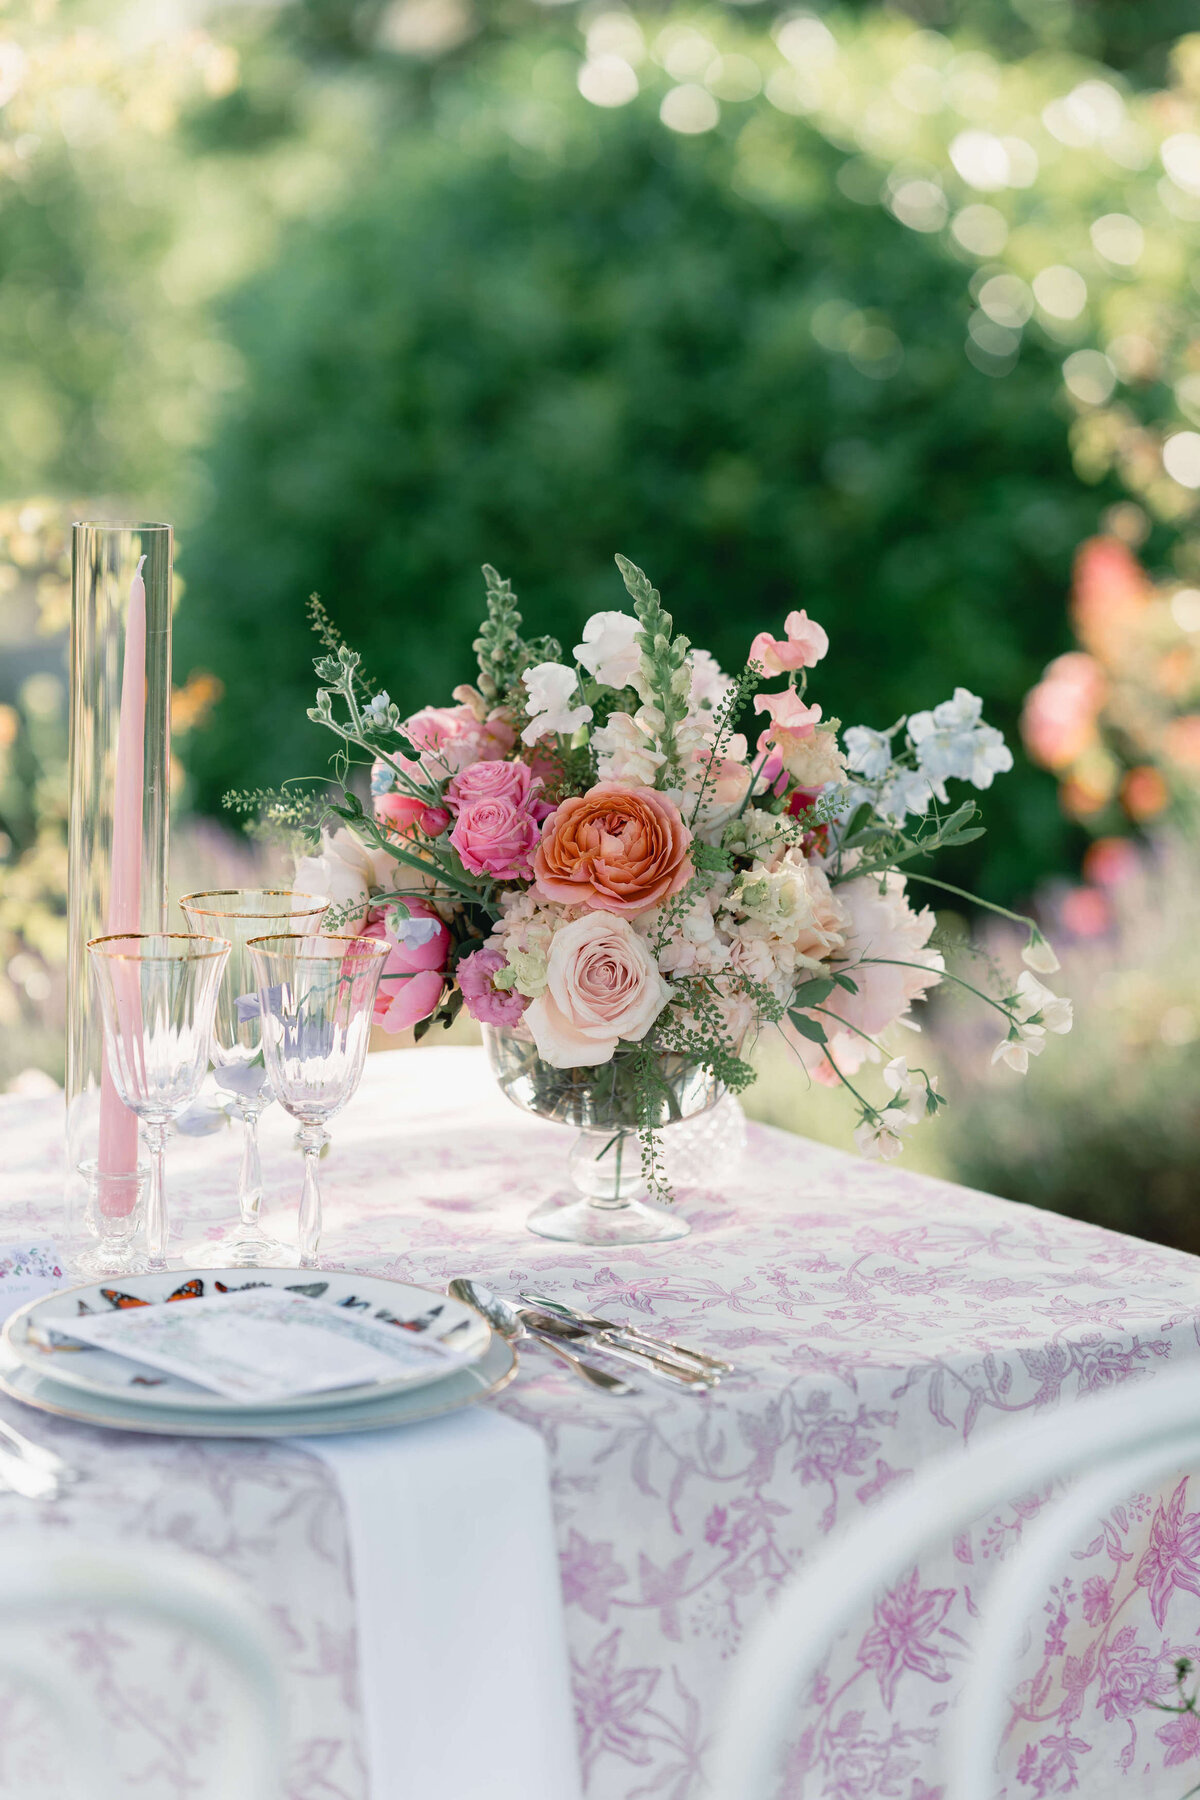 a wedding table with pink and white floral linen featuring a bouquet of summer flowers in shades of pink for a wedding at euridge manor in the cotswolds